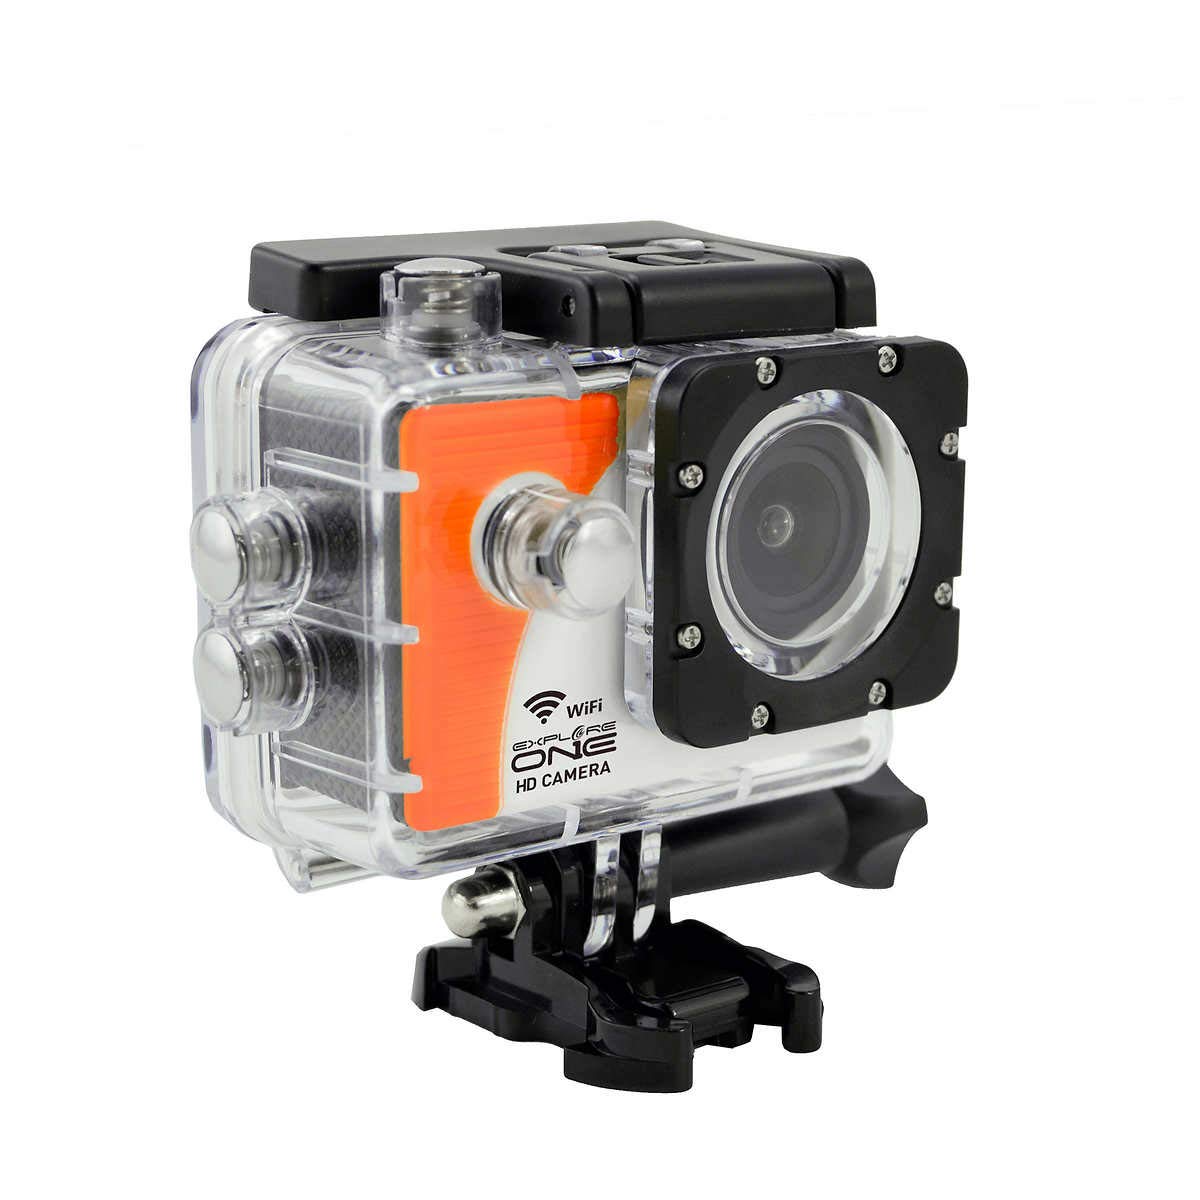 ExploreOne 1080P HD Action Camera with Wi-Fi Item 2450002